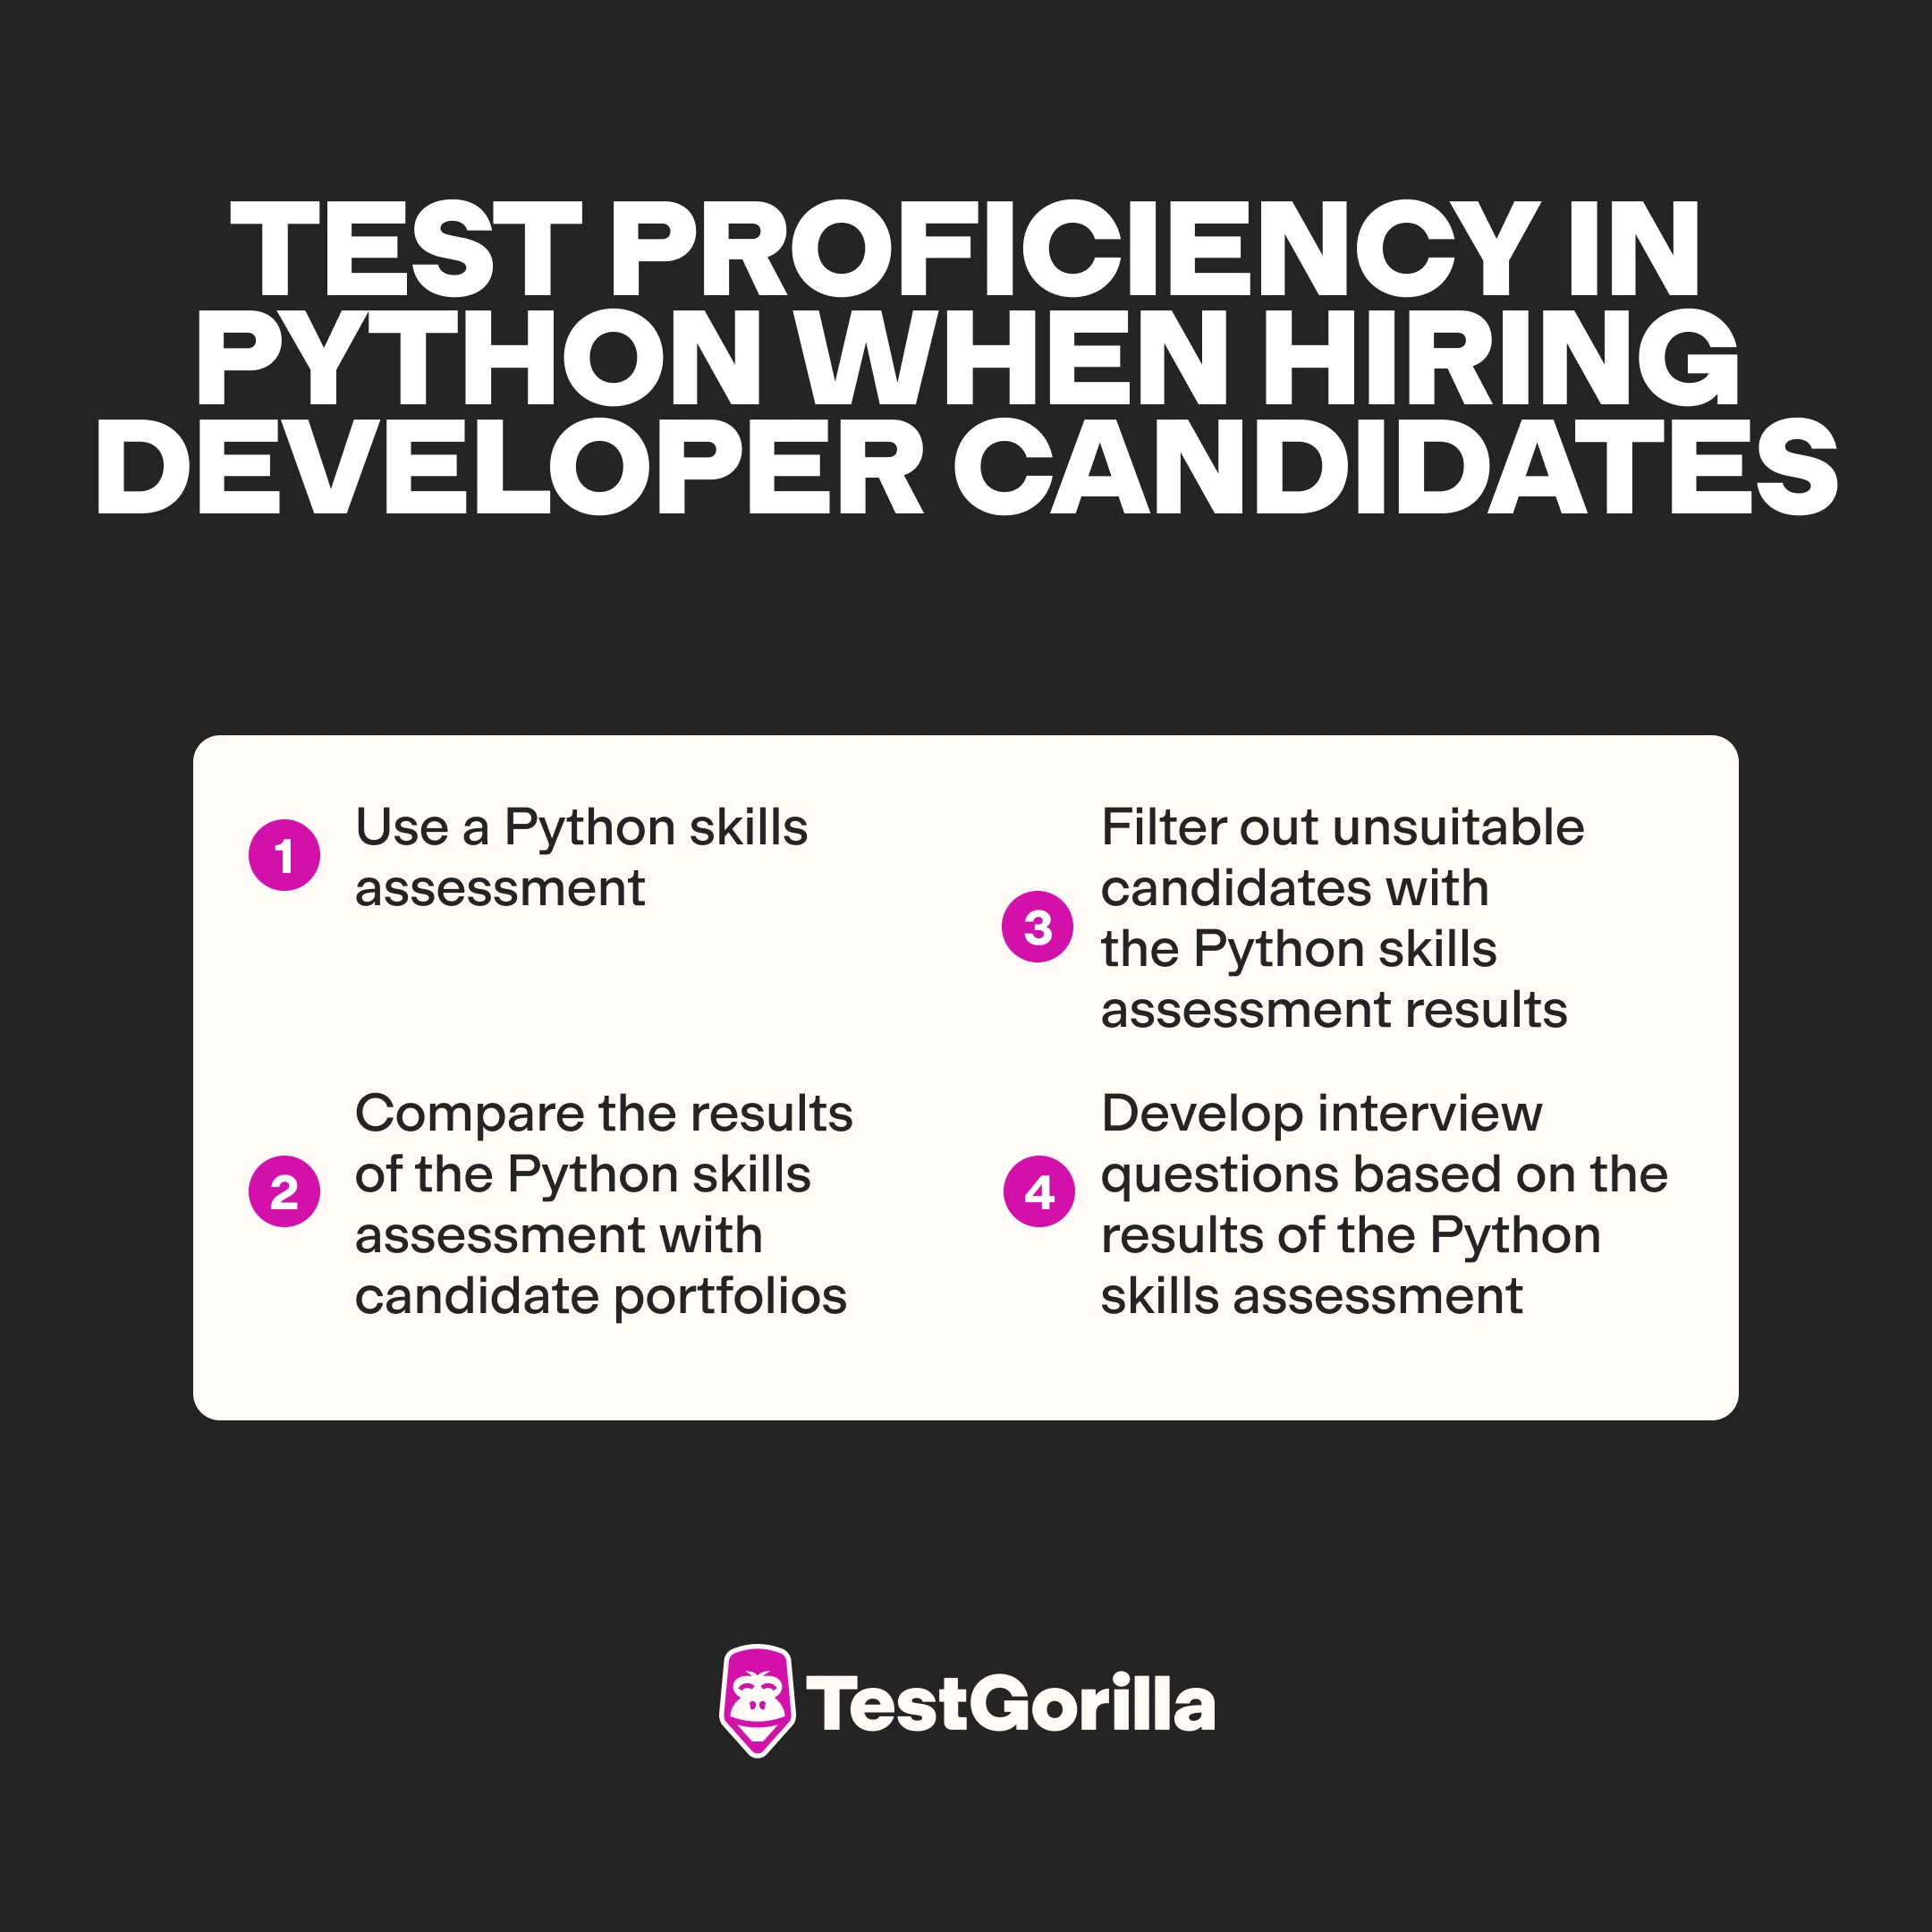 how to test proficiency in Python when hiring developer candidates